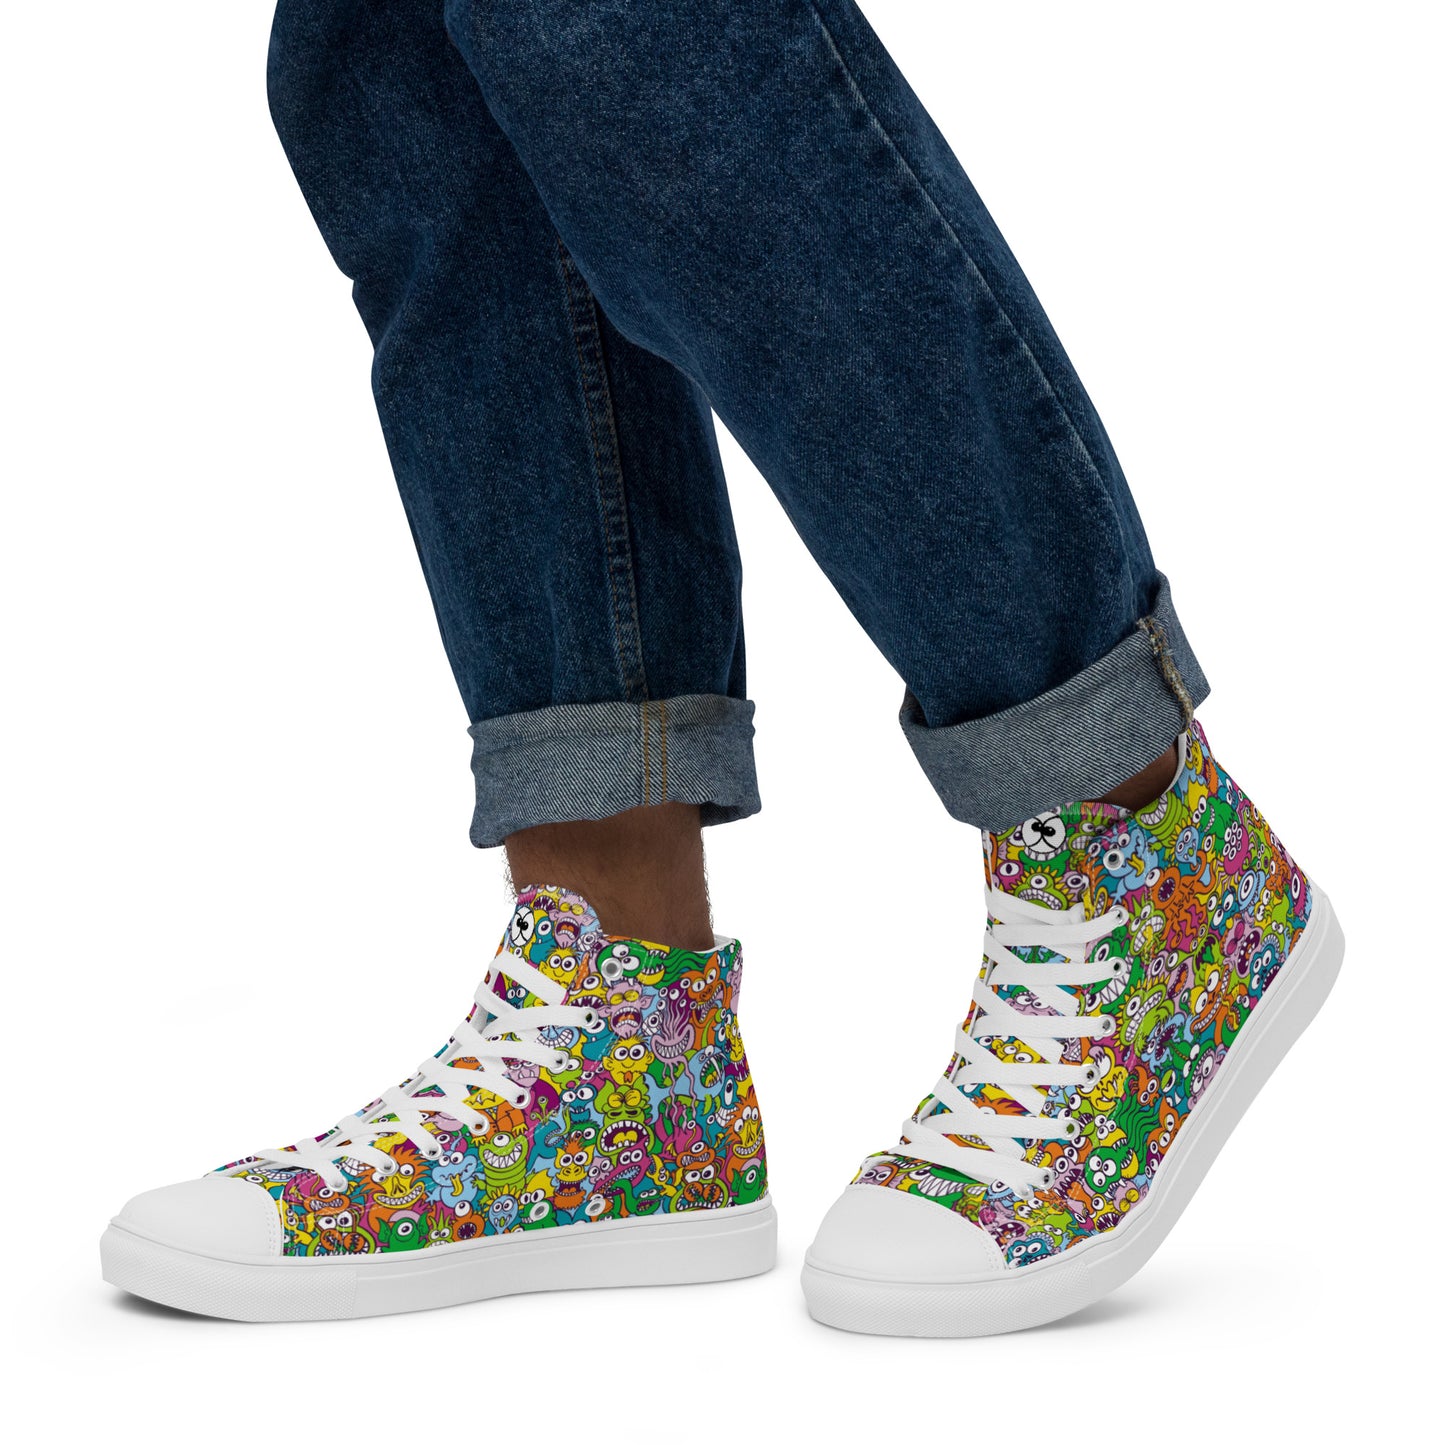 Terrific Halloween creatures ready for a horror movie Men’s high top canvas shoes. Lifestyle